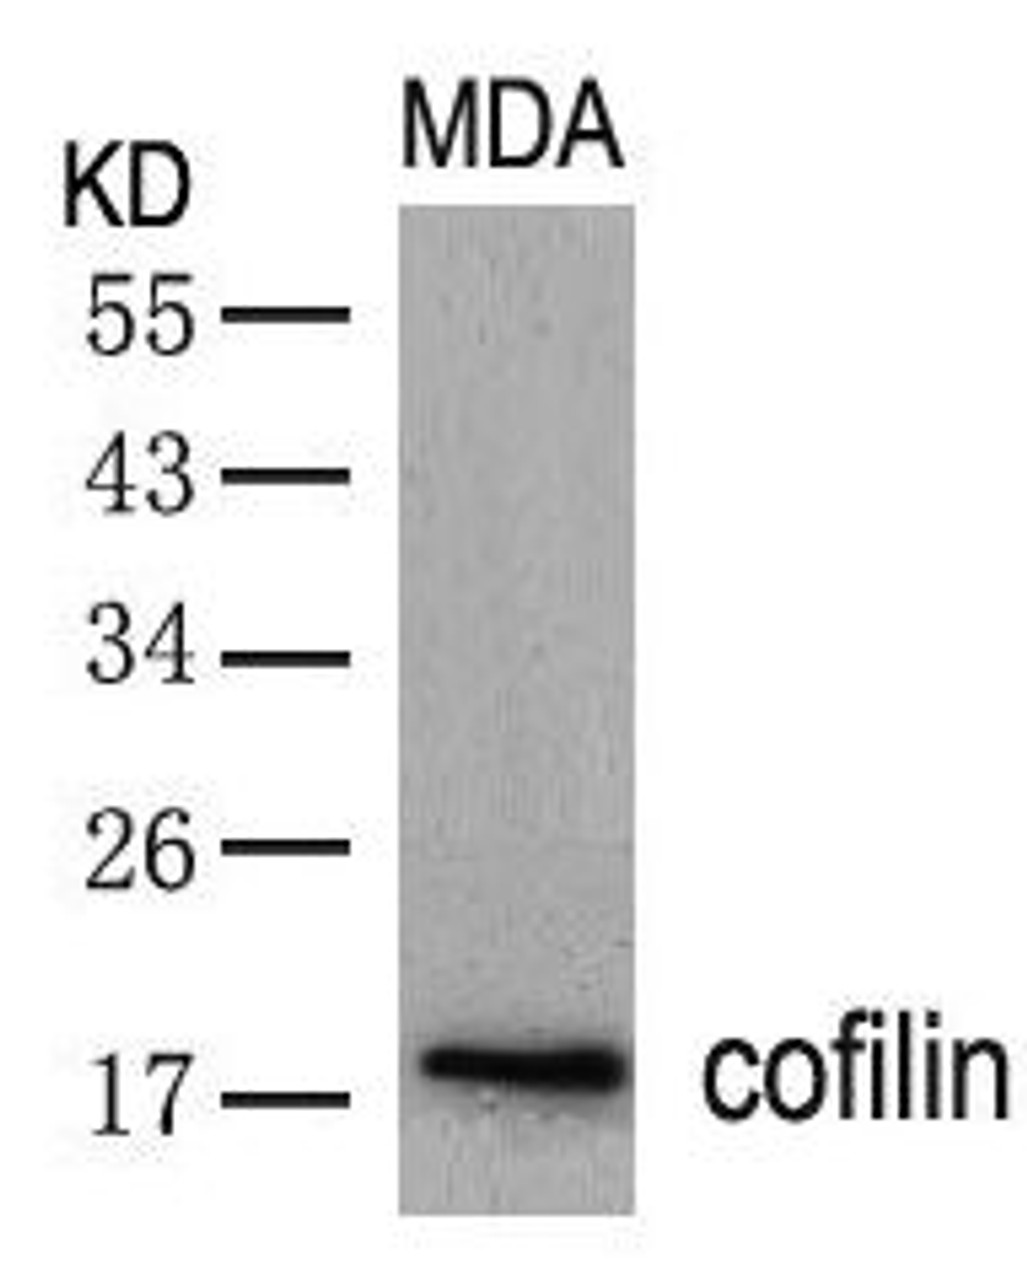 Western blot analysis of lysed extracts from MDA cells using cofilin (Ab-3) .